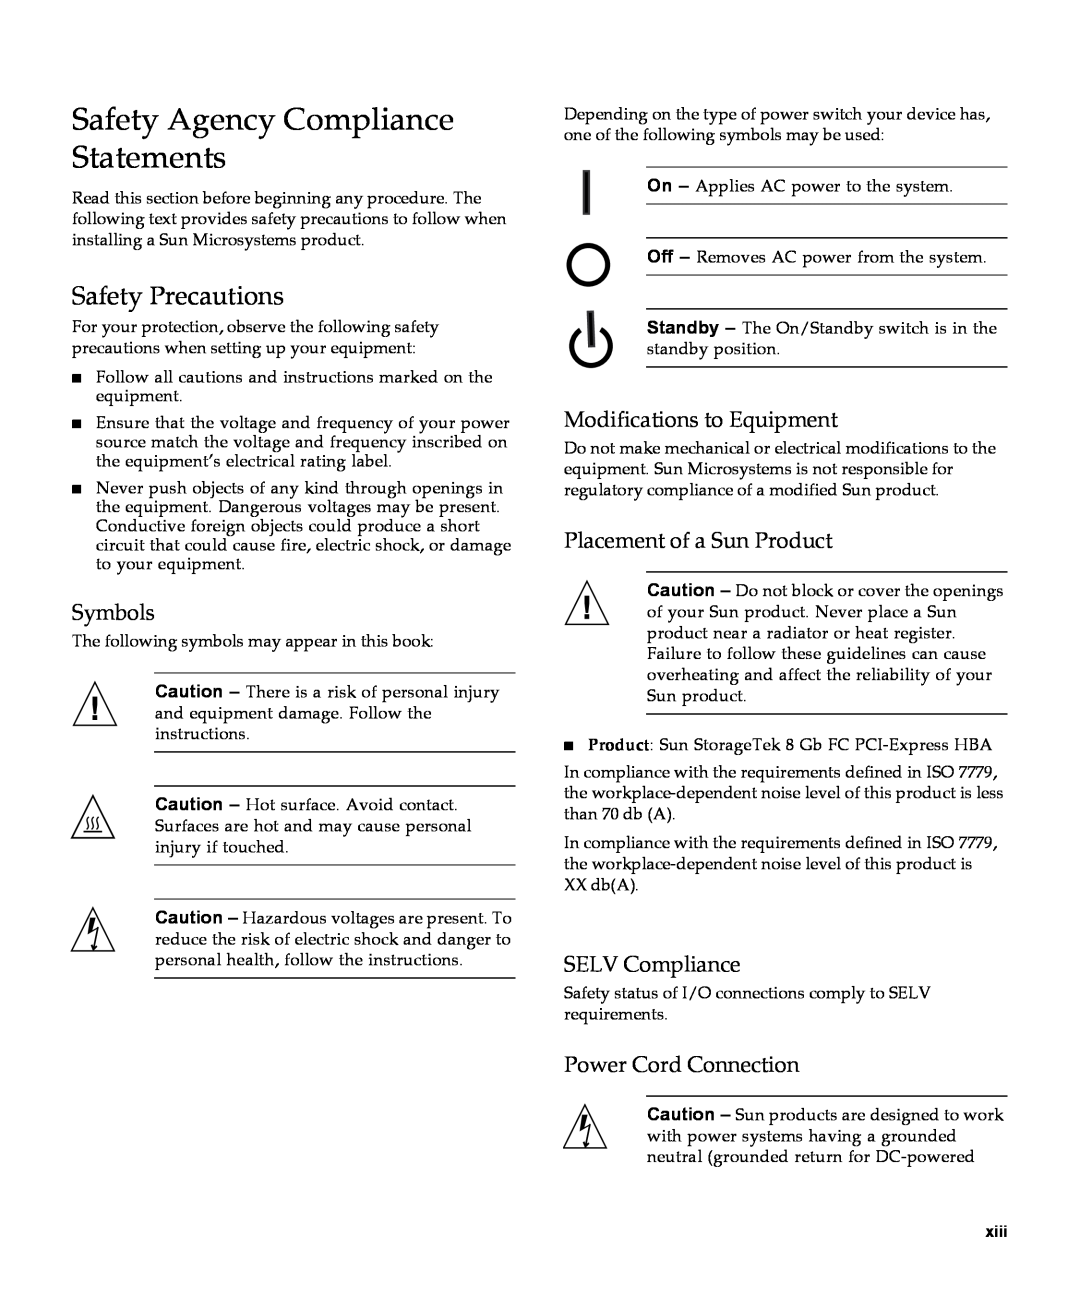 Sun Microsystems SG-XPCIE1FC-QF8-Z Safety Agency Compliance Statements, Safety Precautions, Symbols, SELV Compliance, xiii 